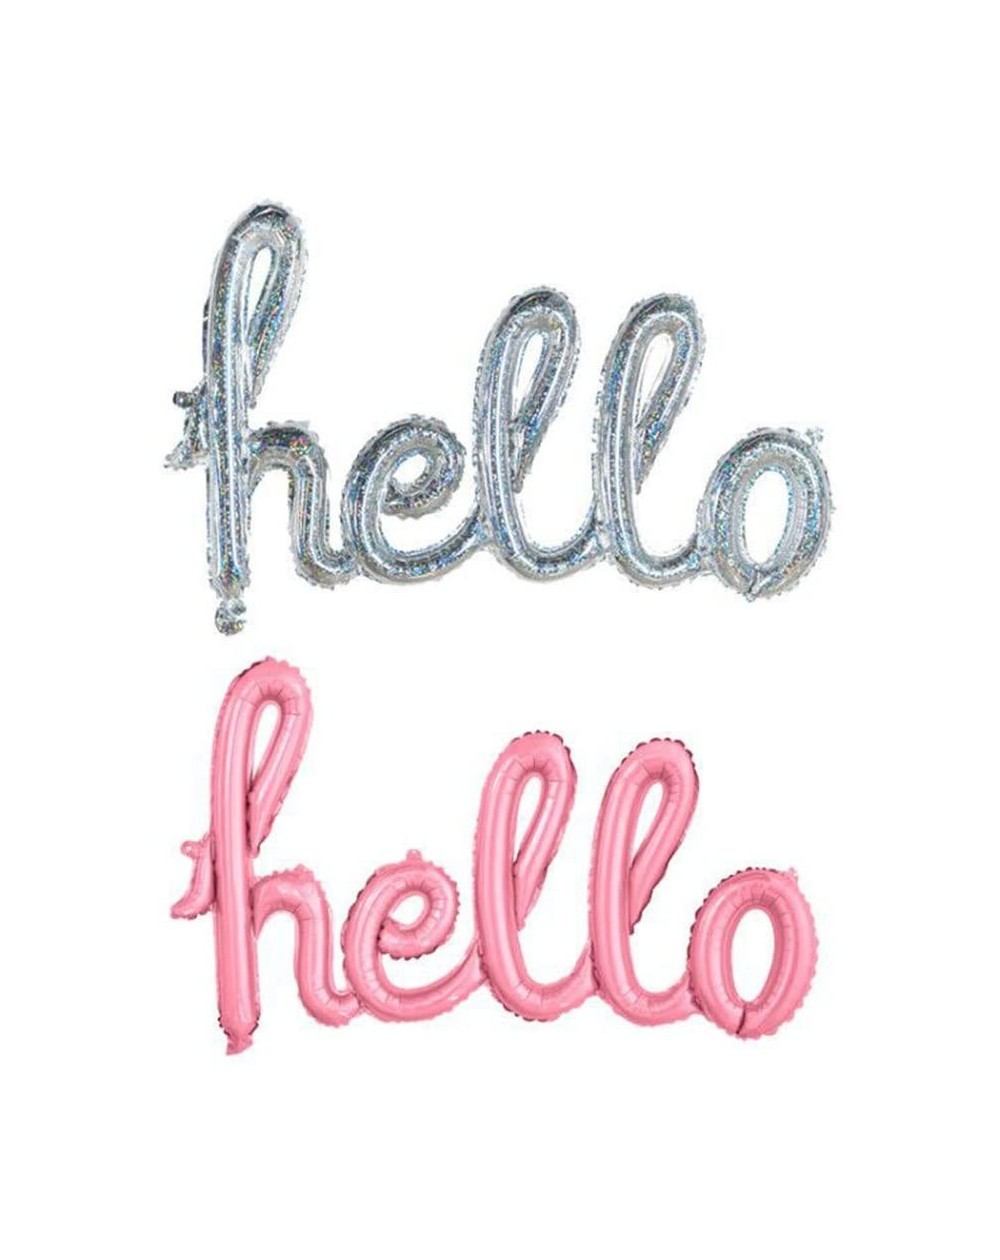 Balloons 2 pcs Hello Letter Mylar Balloons- 39inch x 23inch Pink and Silver One-piece Alphabet Hello Foil Balloons for Weddin...